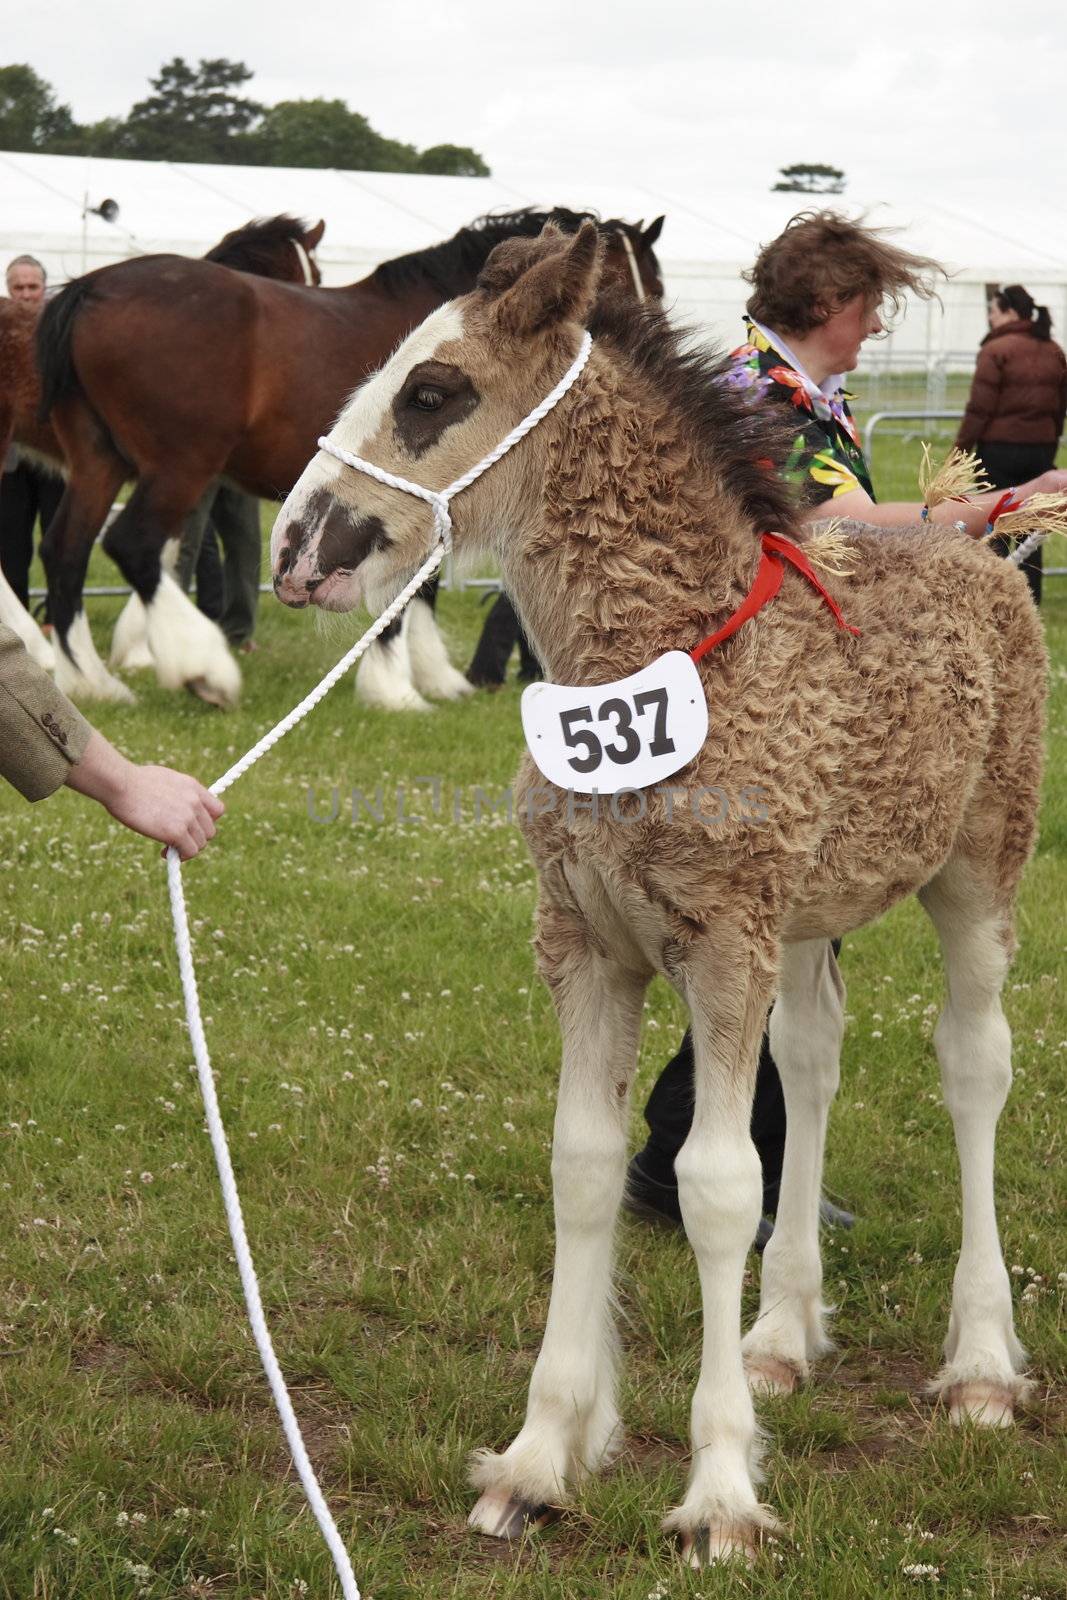 shirehorse foal being shown at a county show